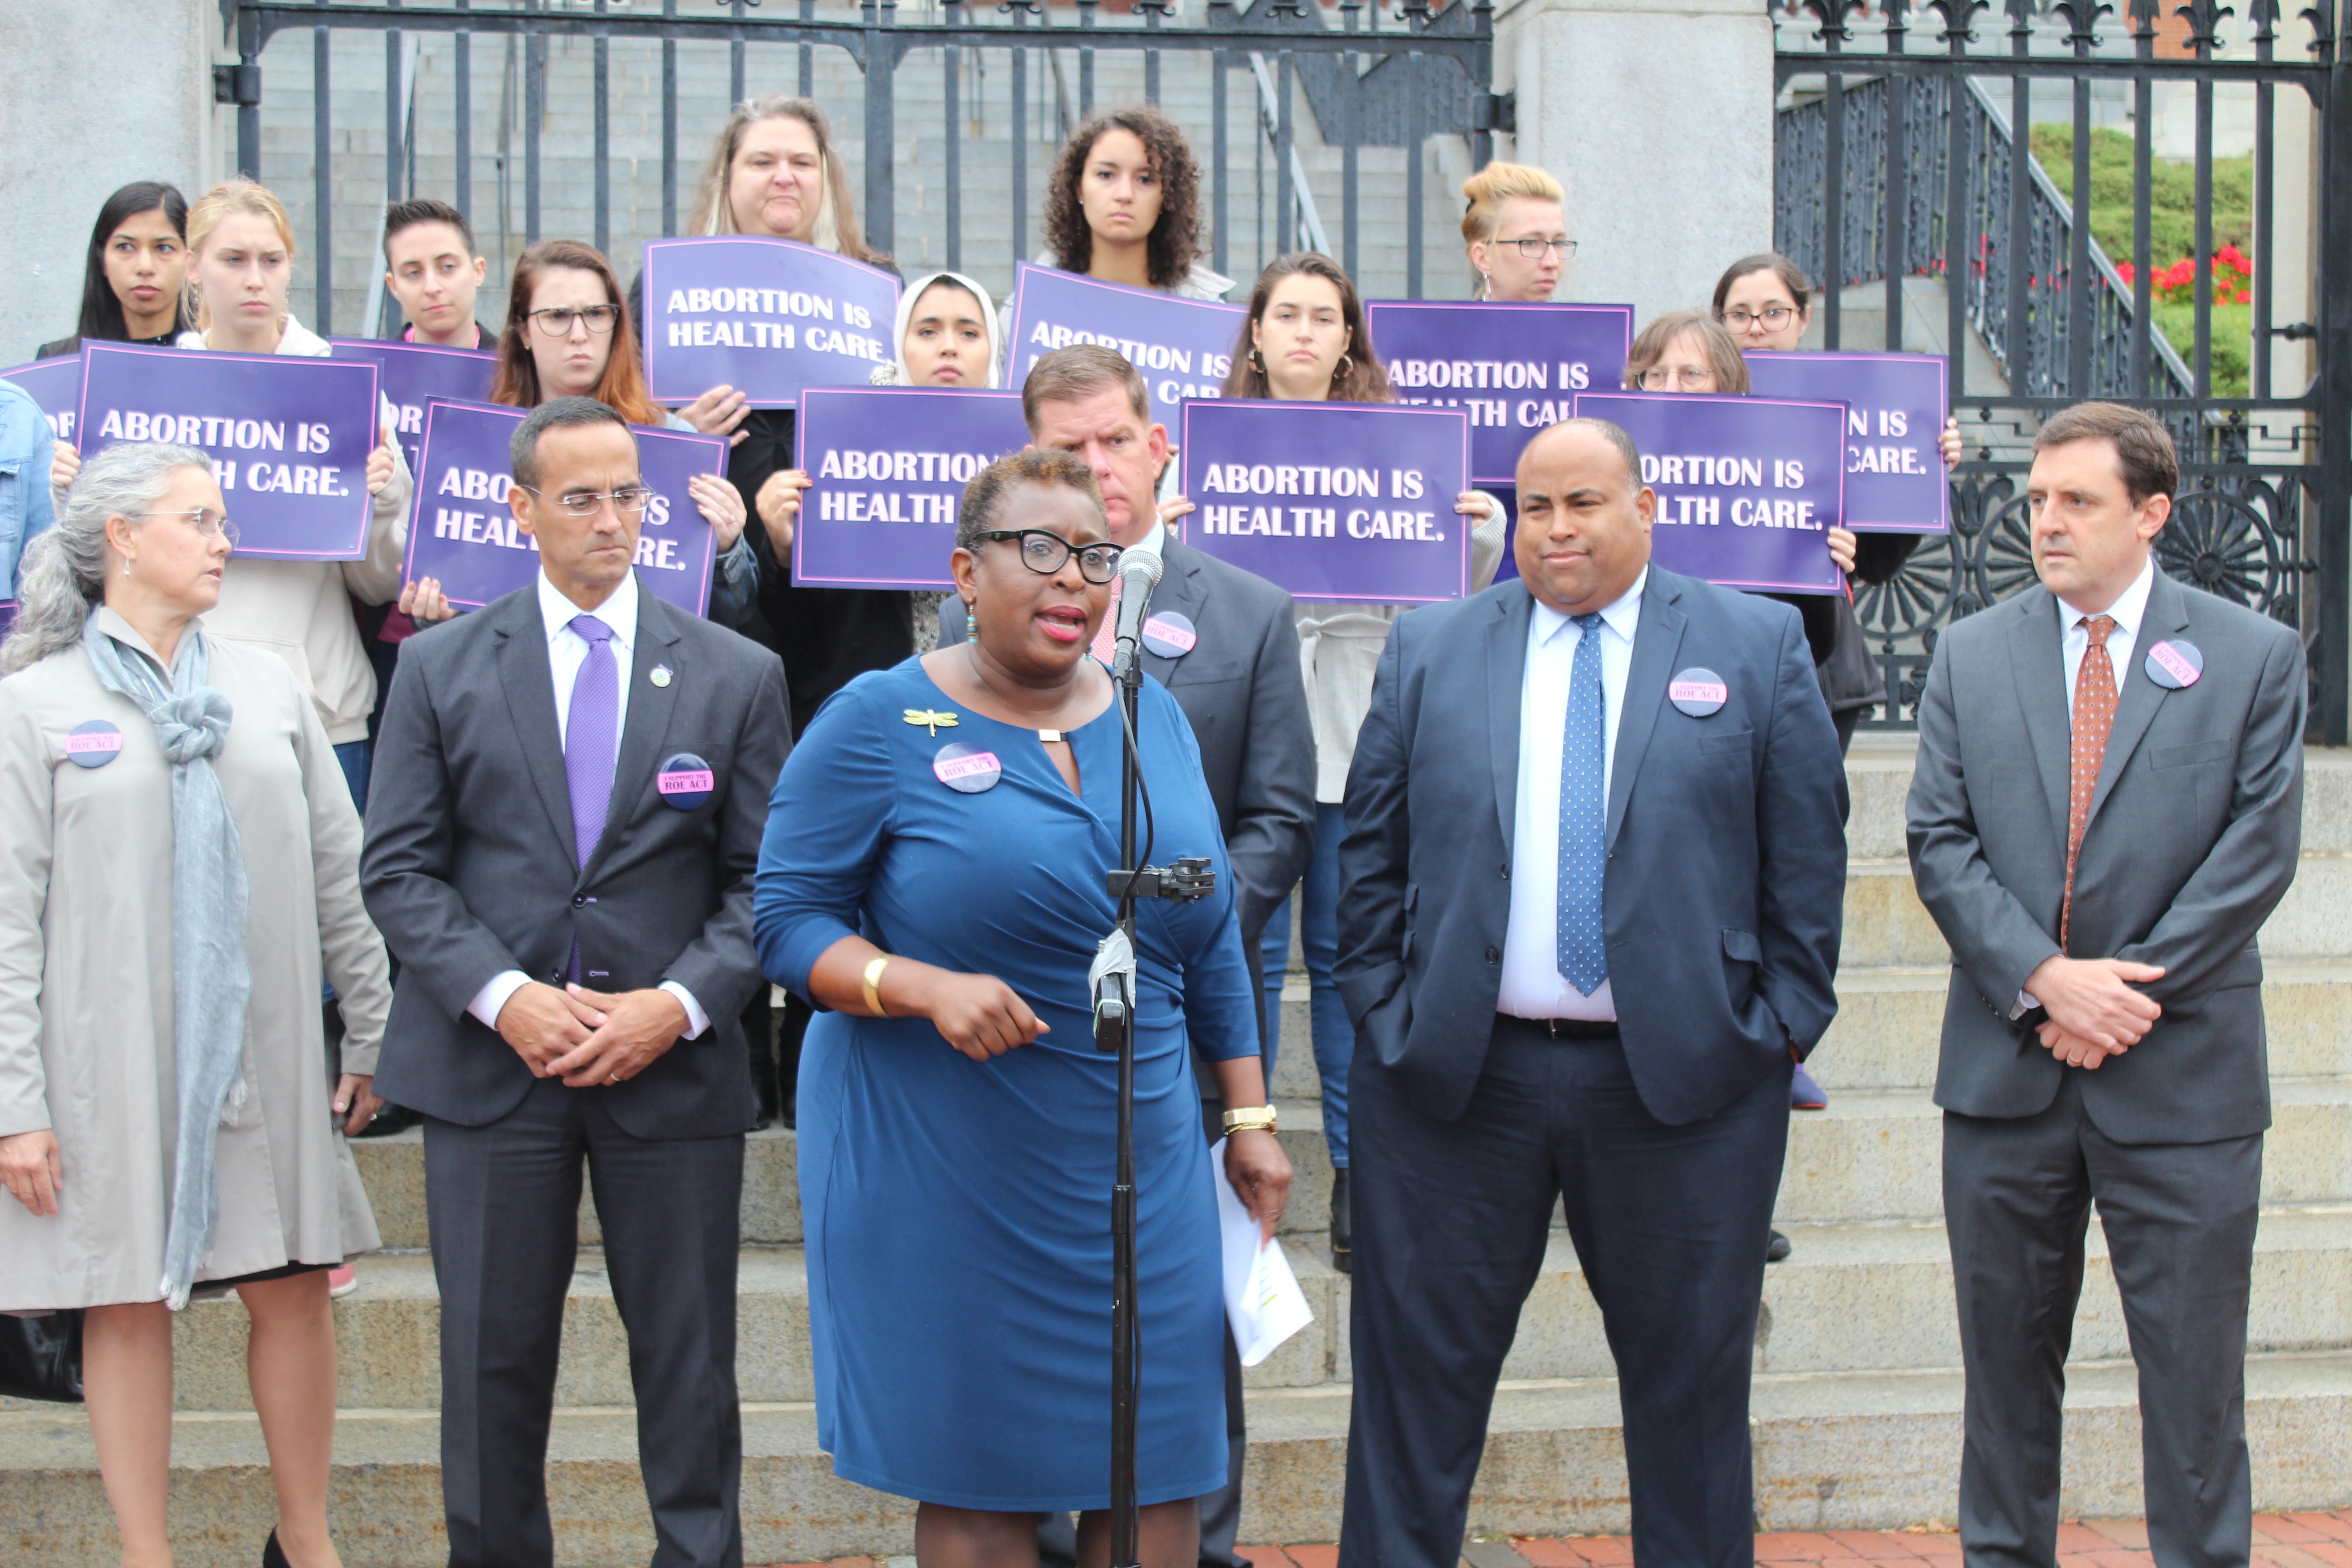 (From left to right) Mayors Nicole LaChapelle of Easthampton, Joseph Curtatone of Somerville, Martin Walsh of Boston, Daniel Rivera of Lawrence and Marc McGovern of Cambridge, stood behind Mayor Yvonne Spicer of Framingham while she spoke of the impact this bill would have on the health care received by women of color in Massachusetts. Photo by Catherine McGloin.